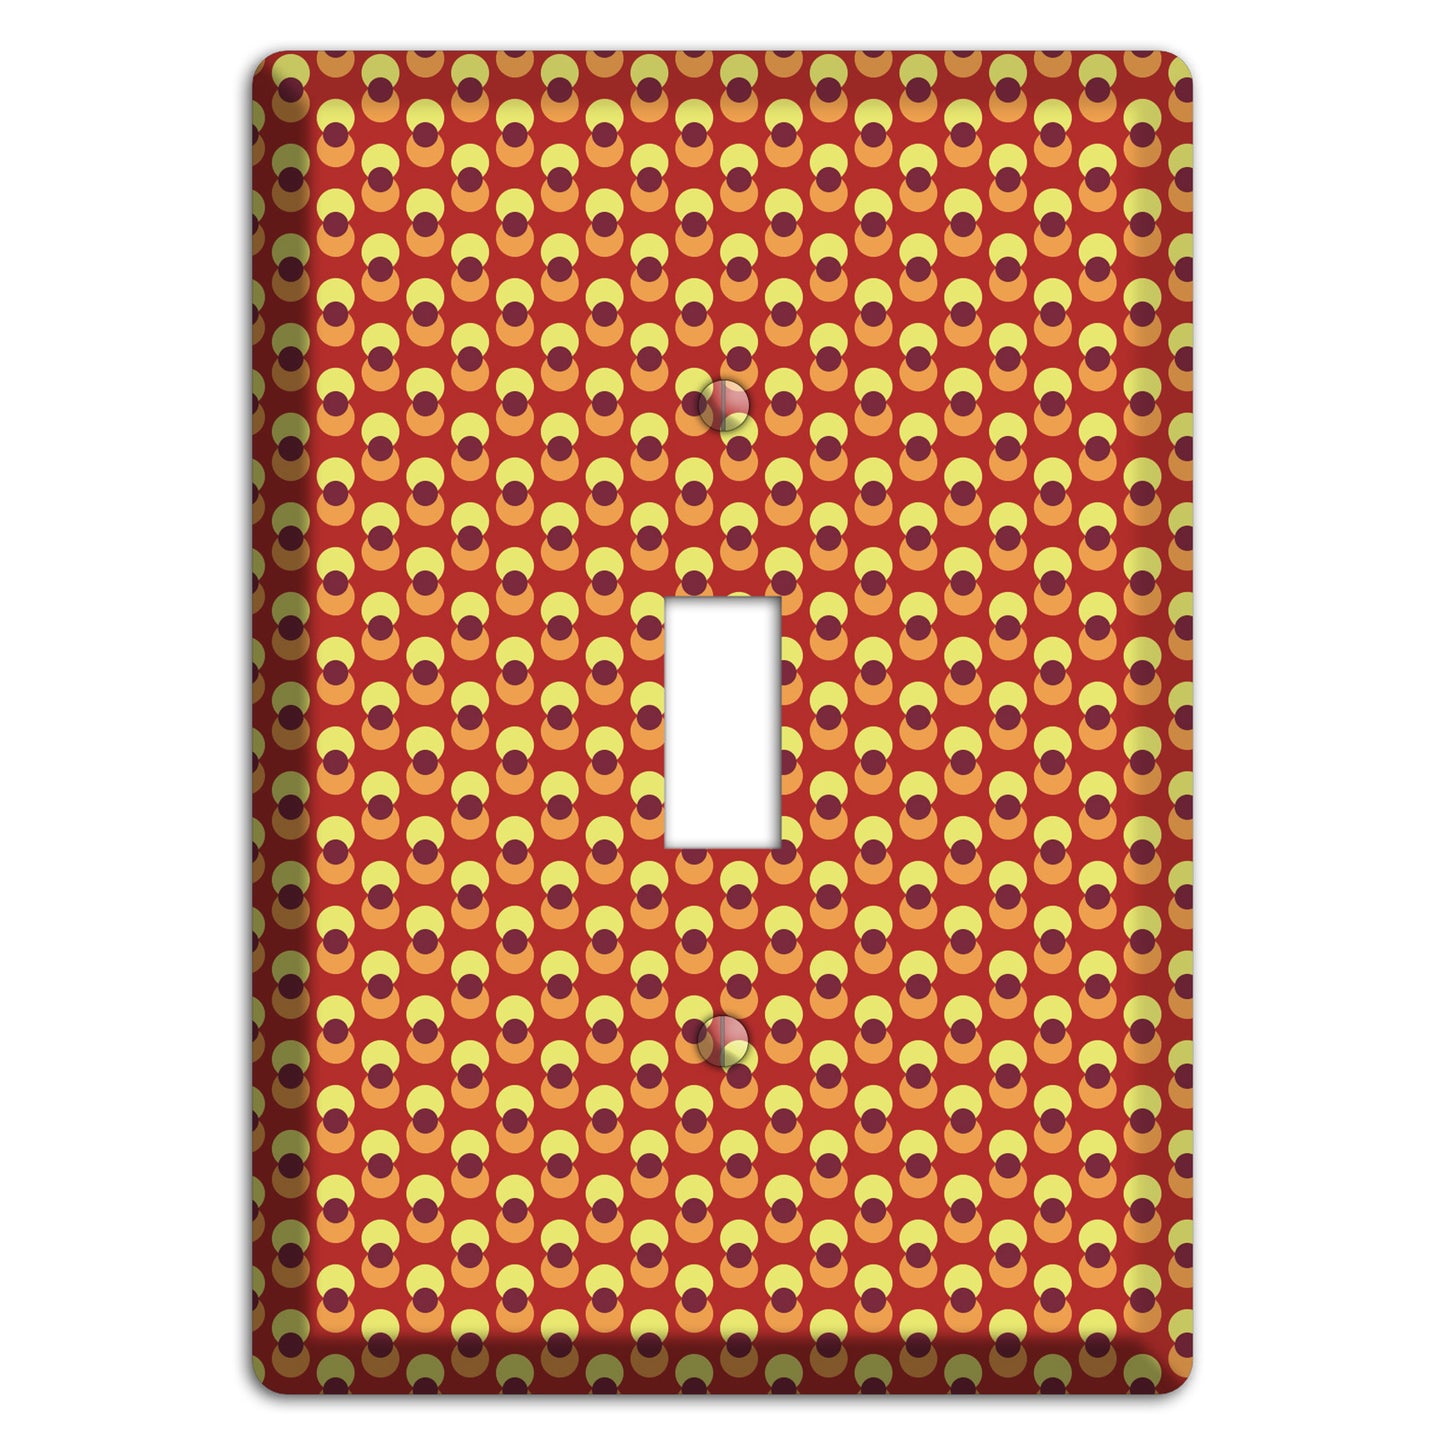 Red Overlain Dots Cover Plates